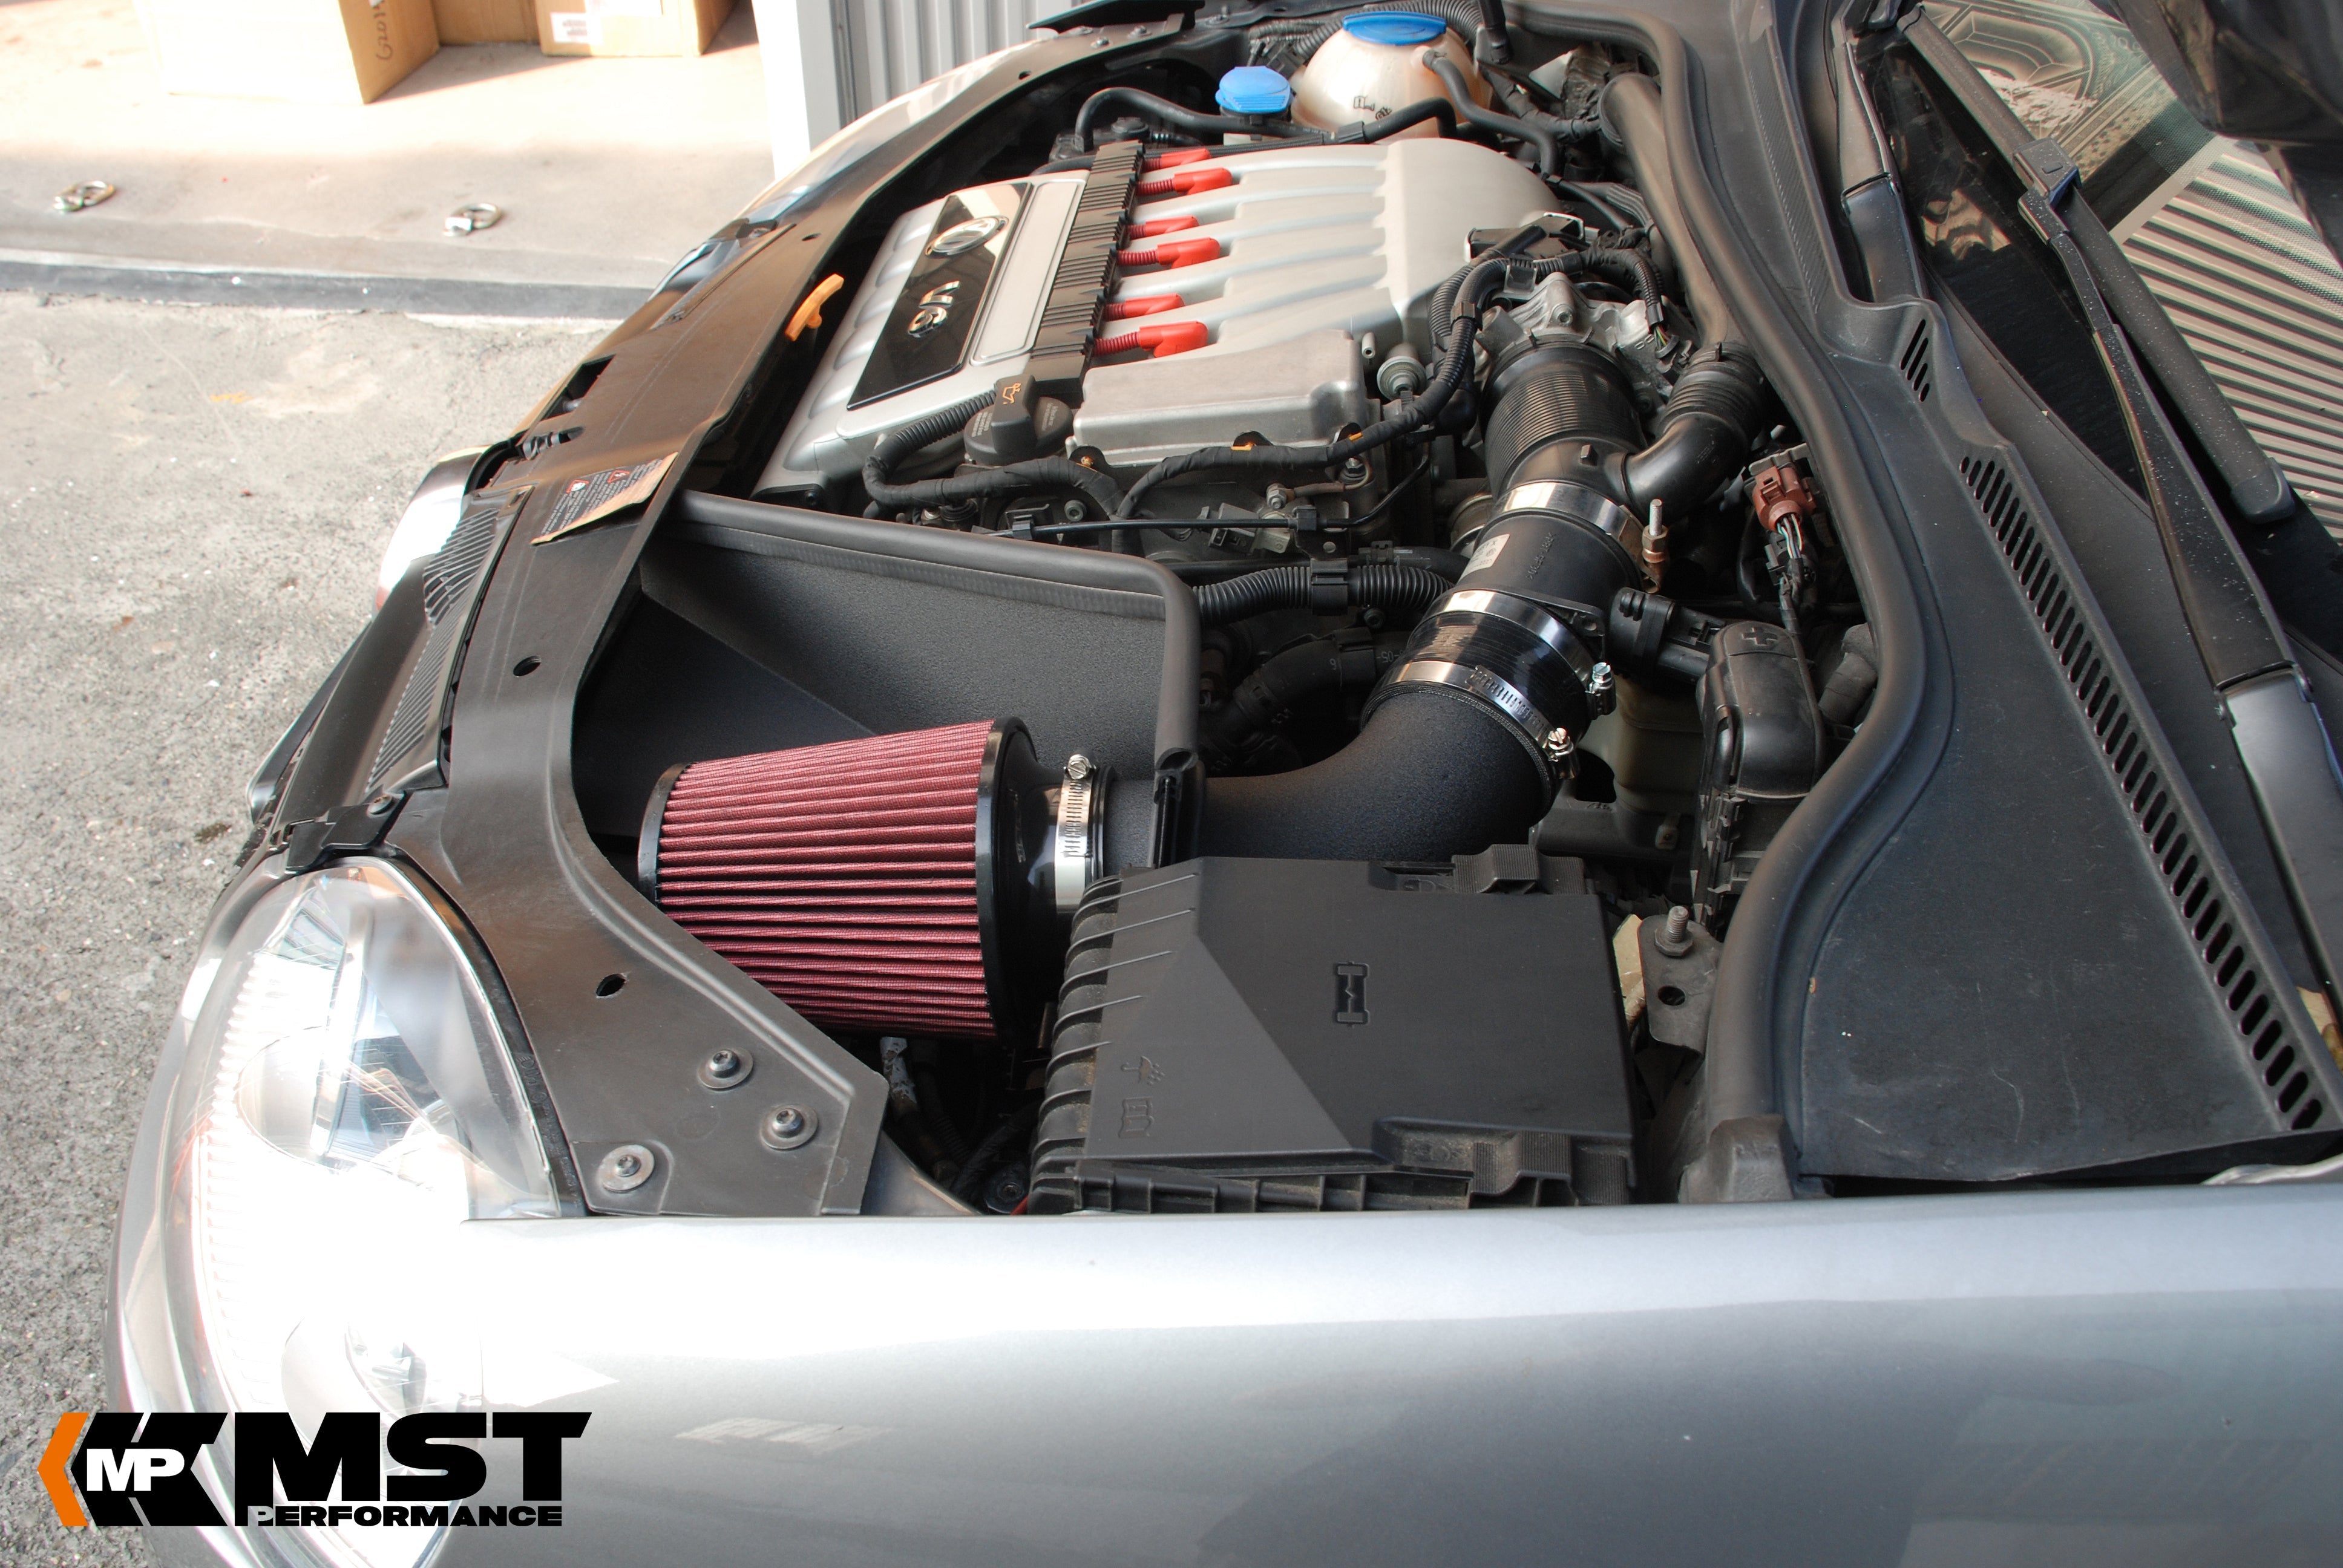 MST Performance  Cold Air Intake for Volkswagen Golf R32 (MK5)/ Audi S3/TT VR6 3.2L (VW-MK5R32) - MODE Auto Concepts